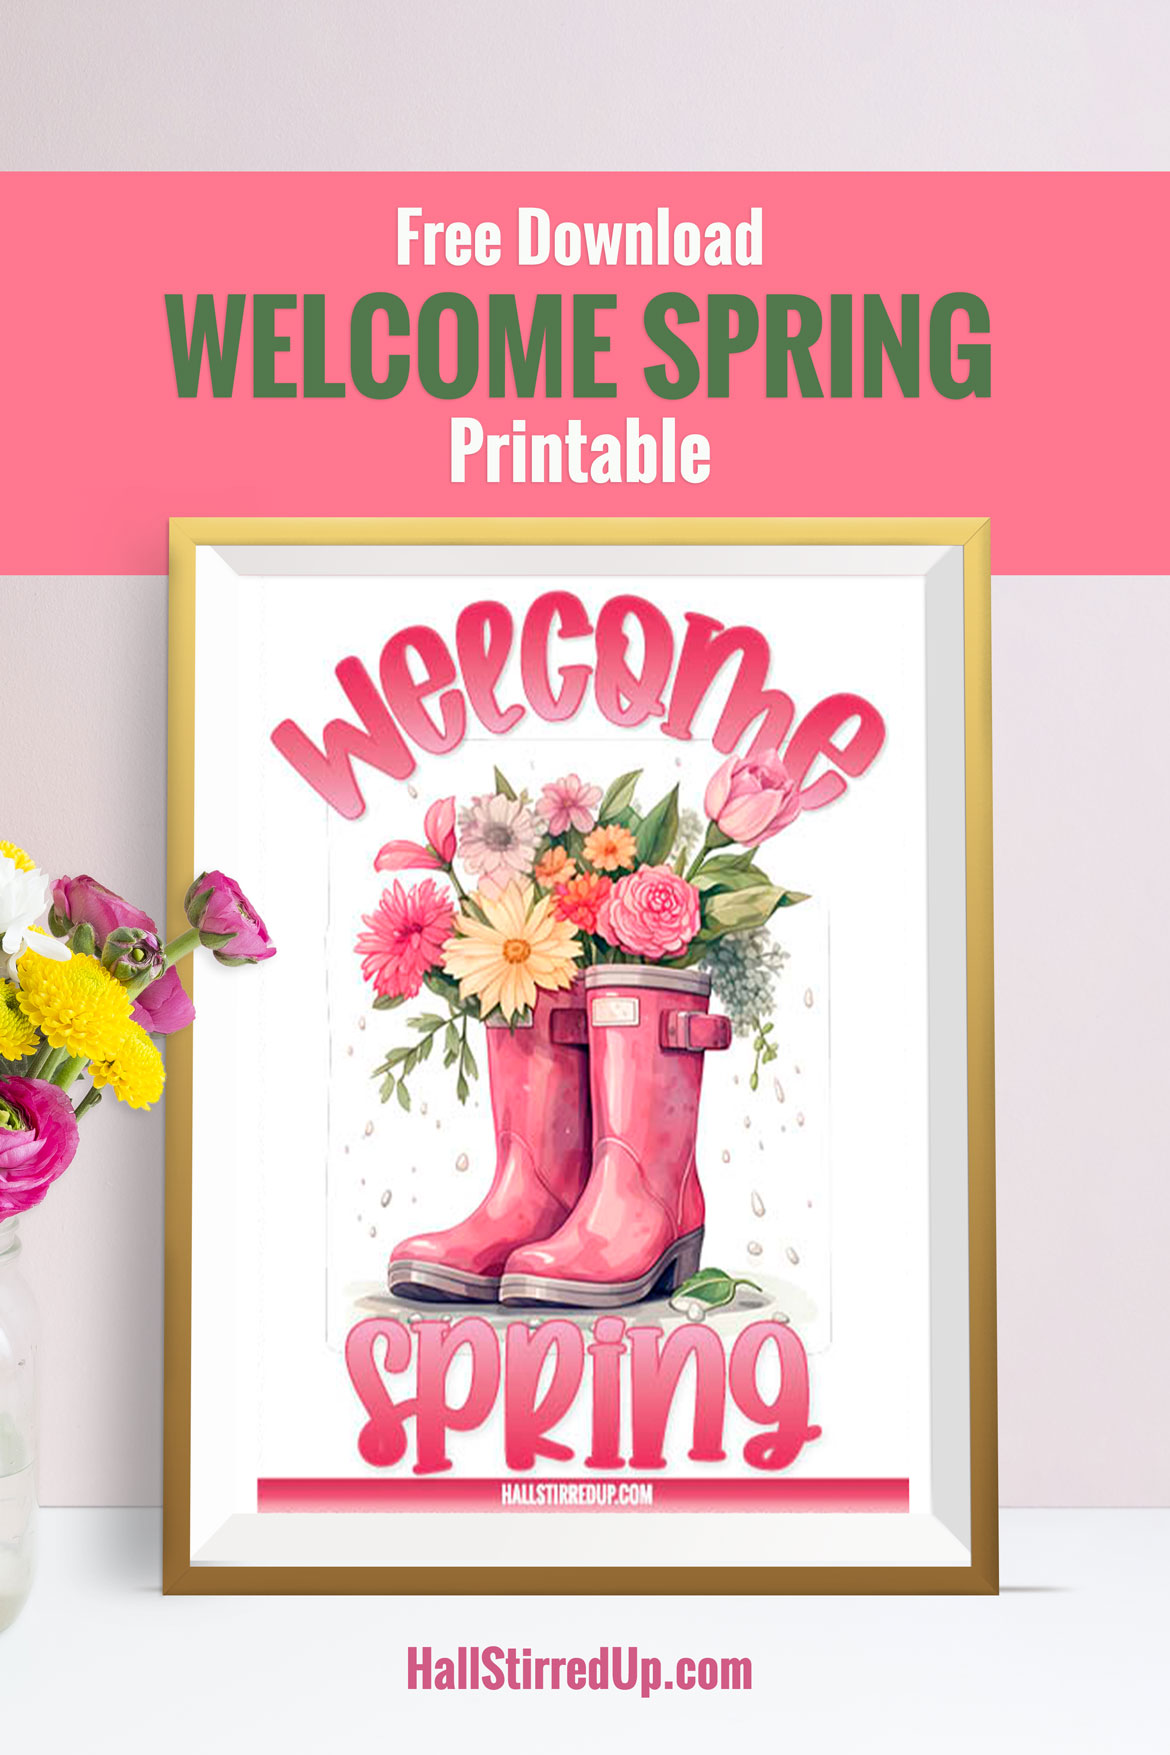 Welcome spring with a pretty free printable